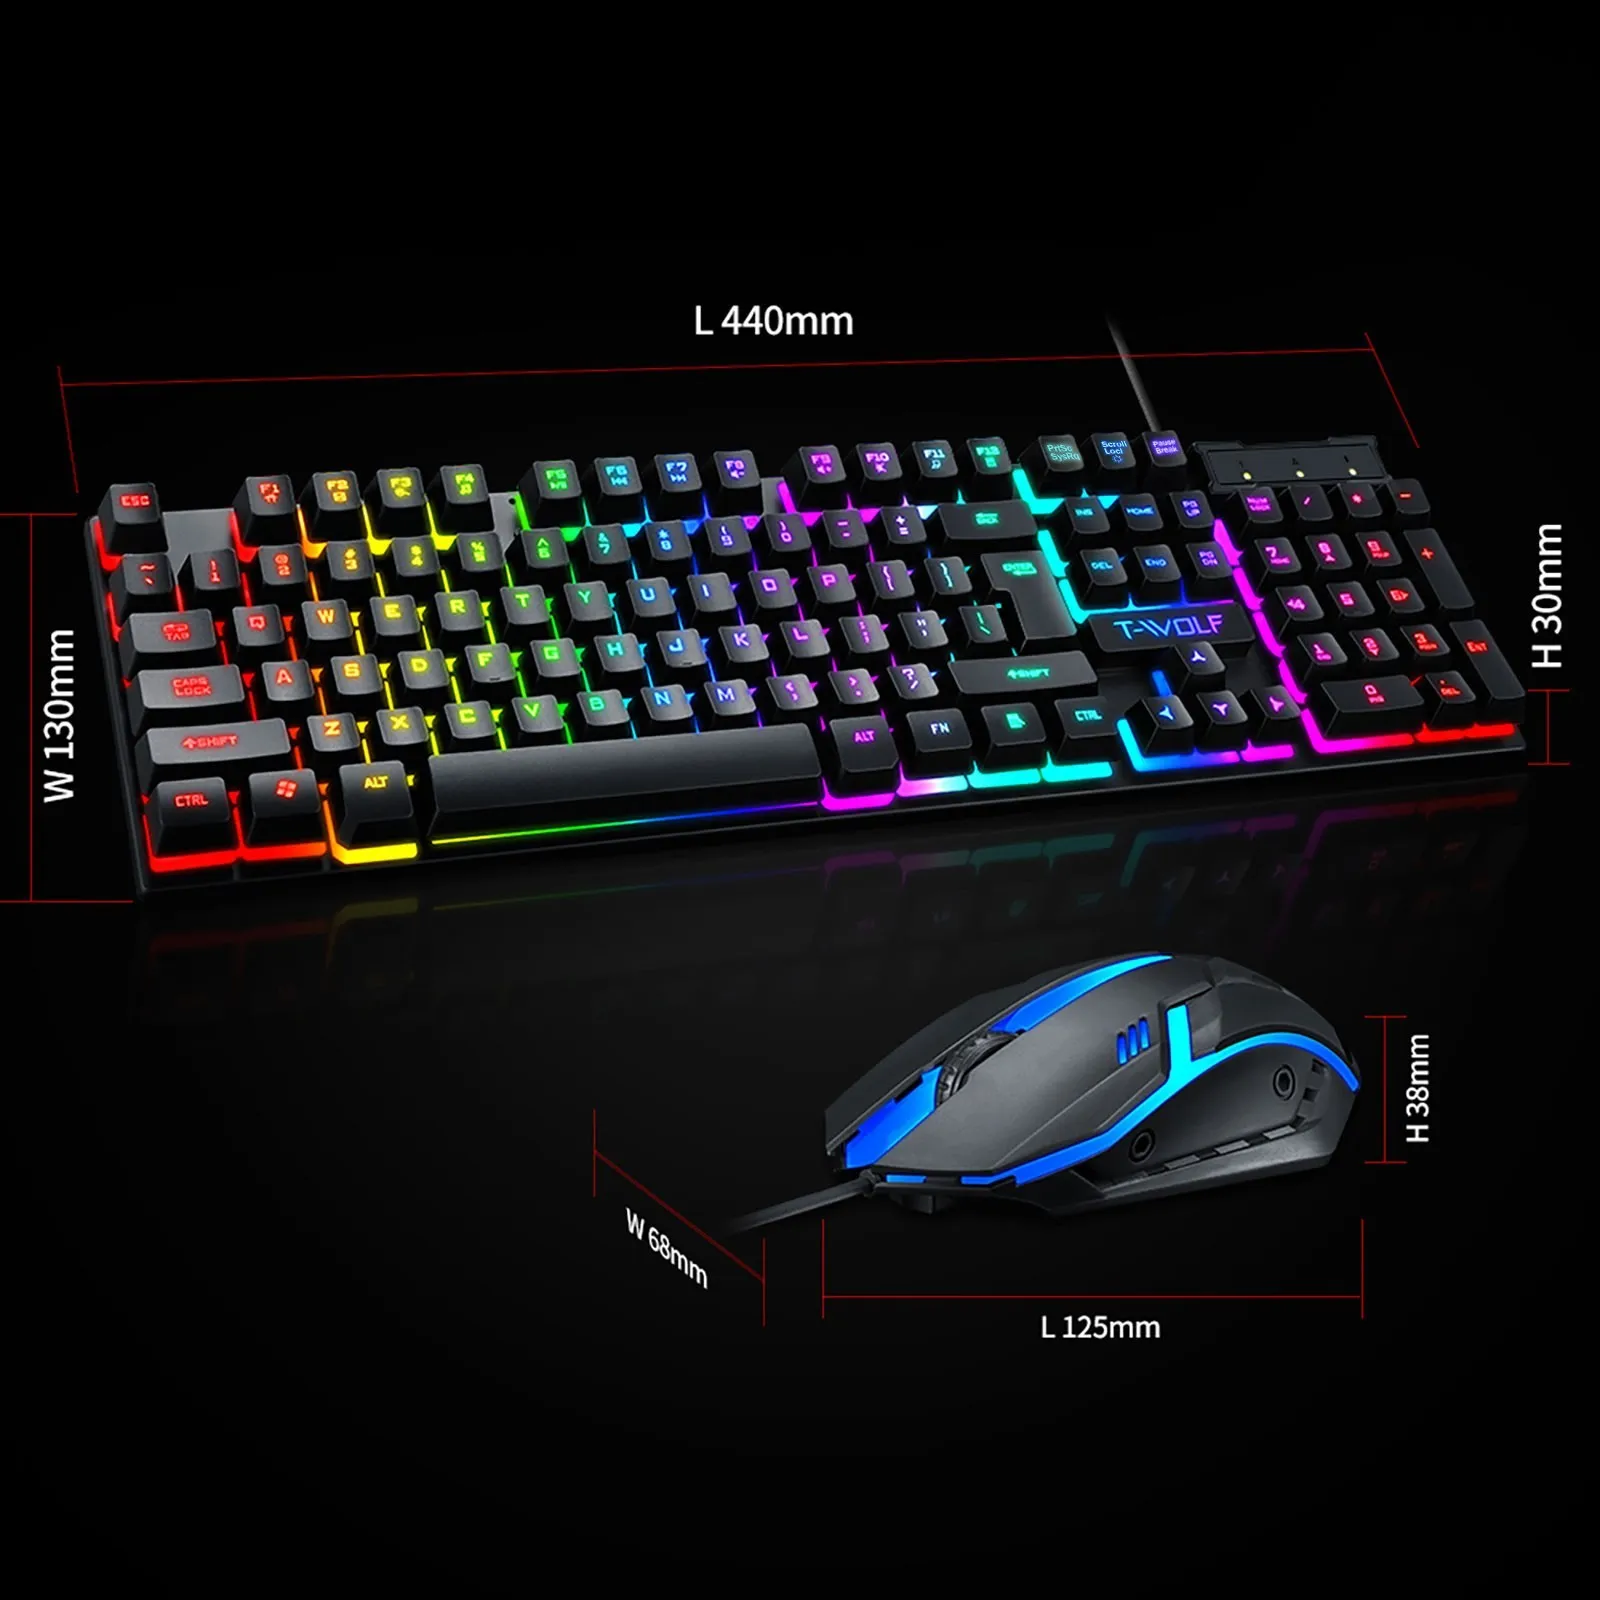 Set Rainbow Backlight Usb 2400DPI Gaming 104Key Wired keyboard Mouse Gamer Laptop PC Games